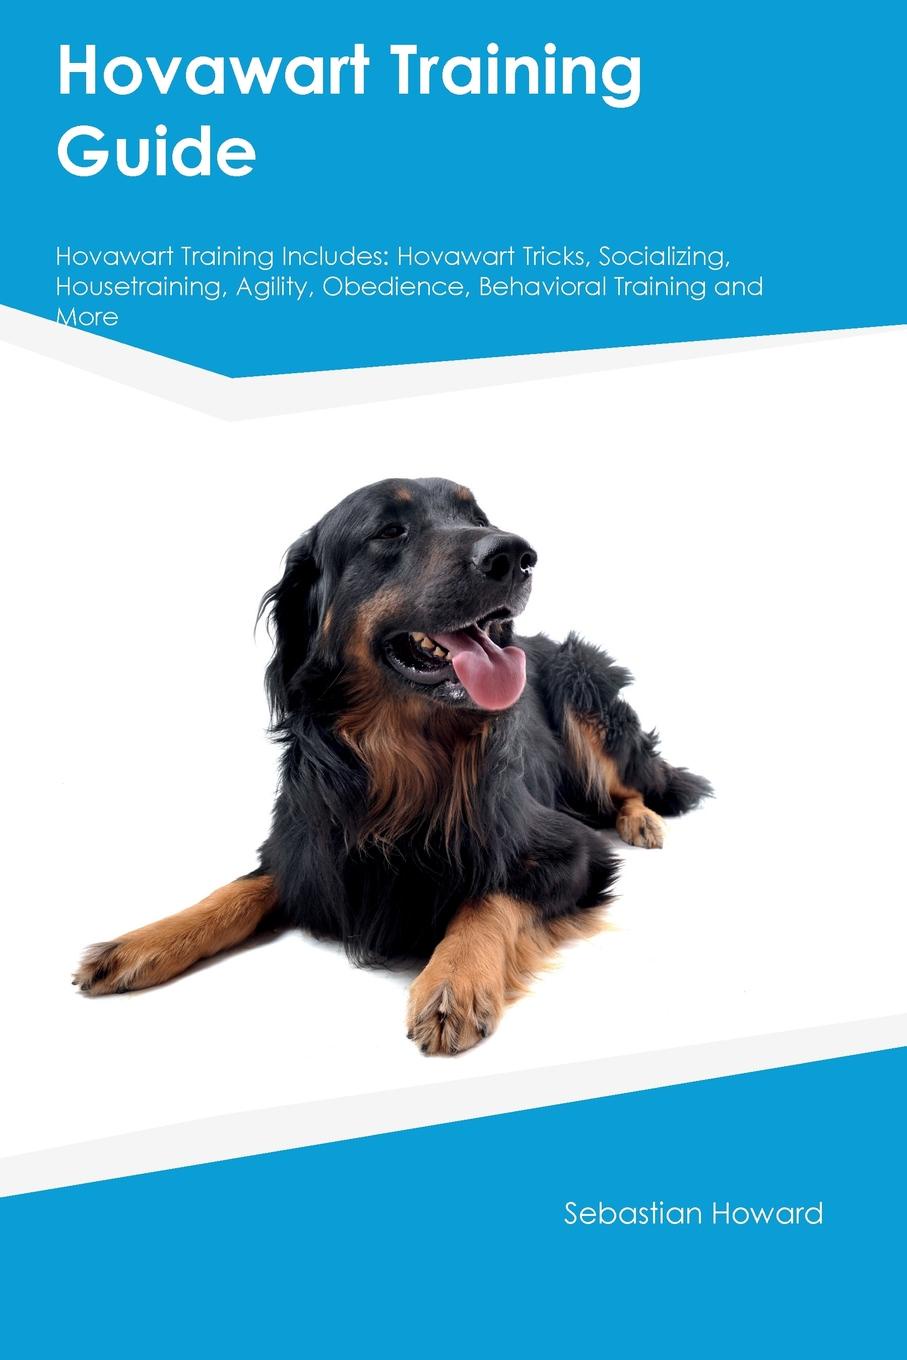 Hovawart Training Guide Hovawart Training Includes. Hovawart Tricks, Socializing, Housetraining, Agility, Obedience, Behavioral Training and More